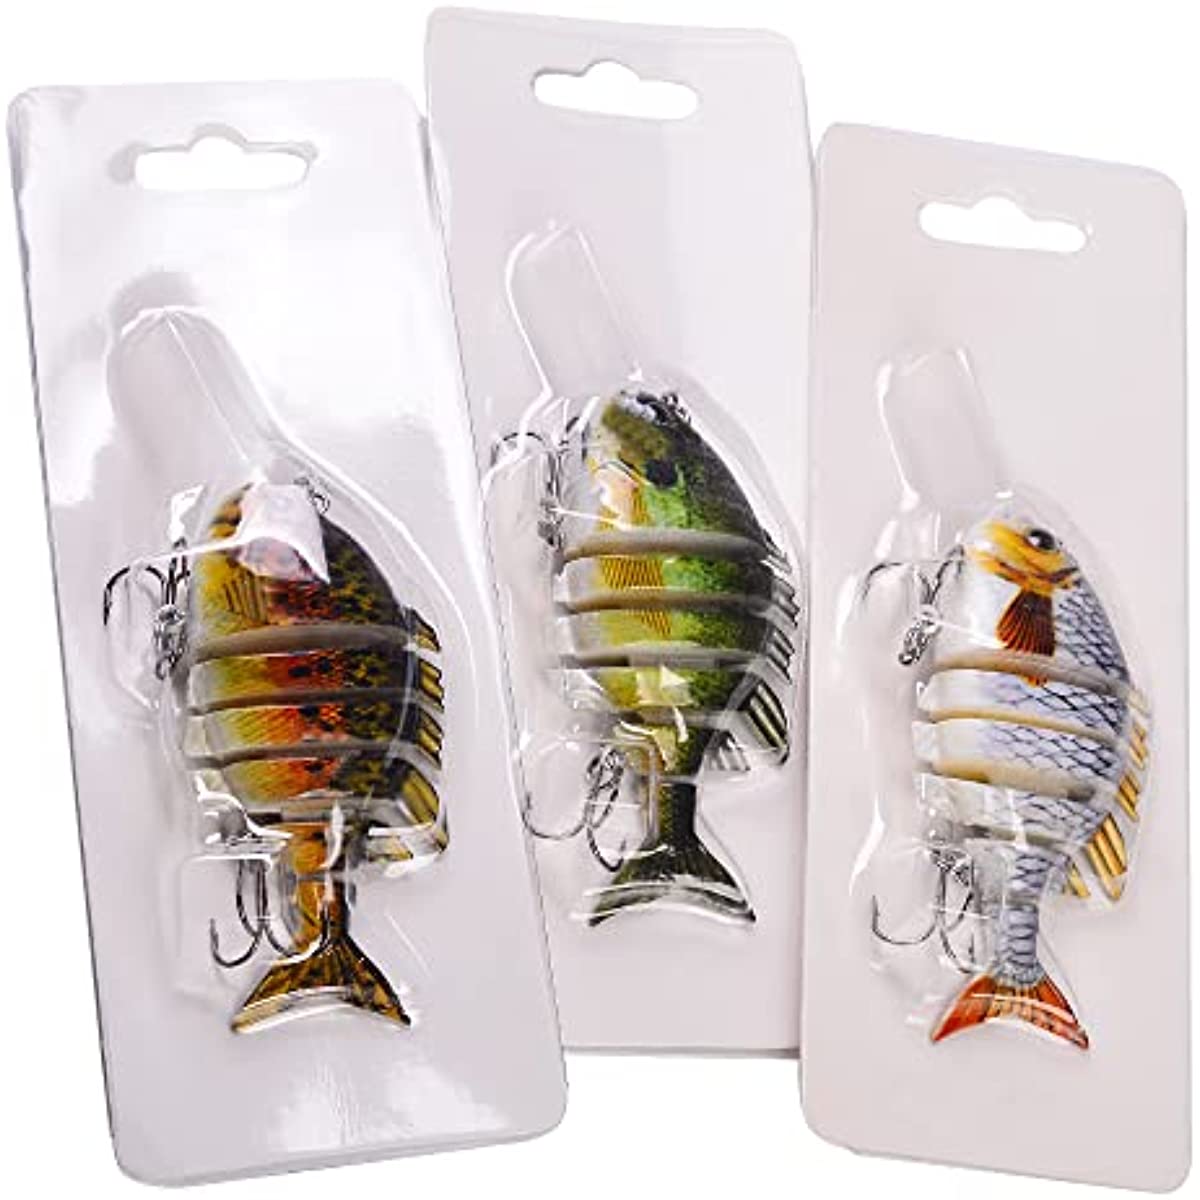 ICRPSTU Hard Bait 3D Simulated Skin Fishing Lures Kit Eyes with Barbs for  River